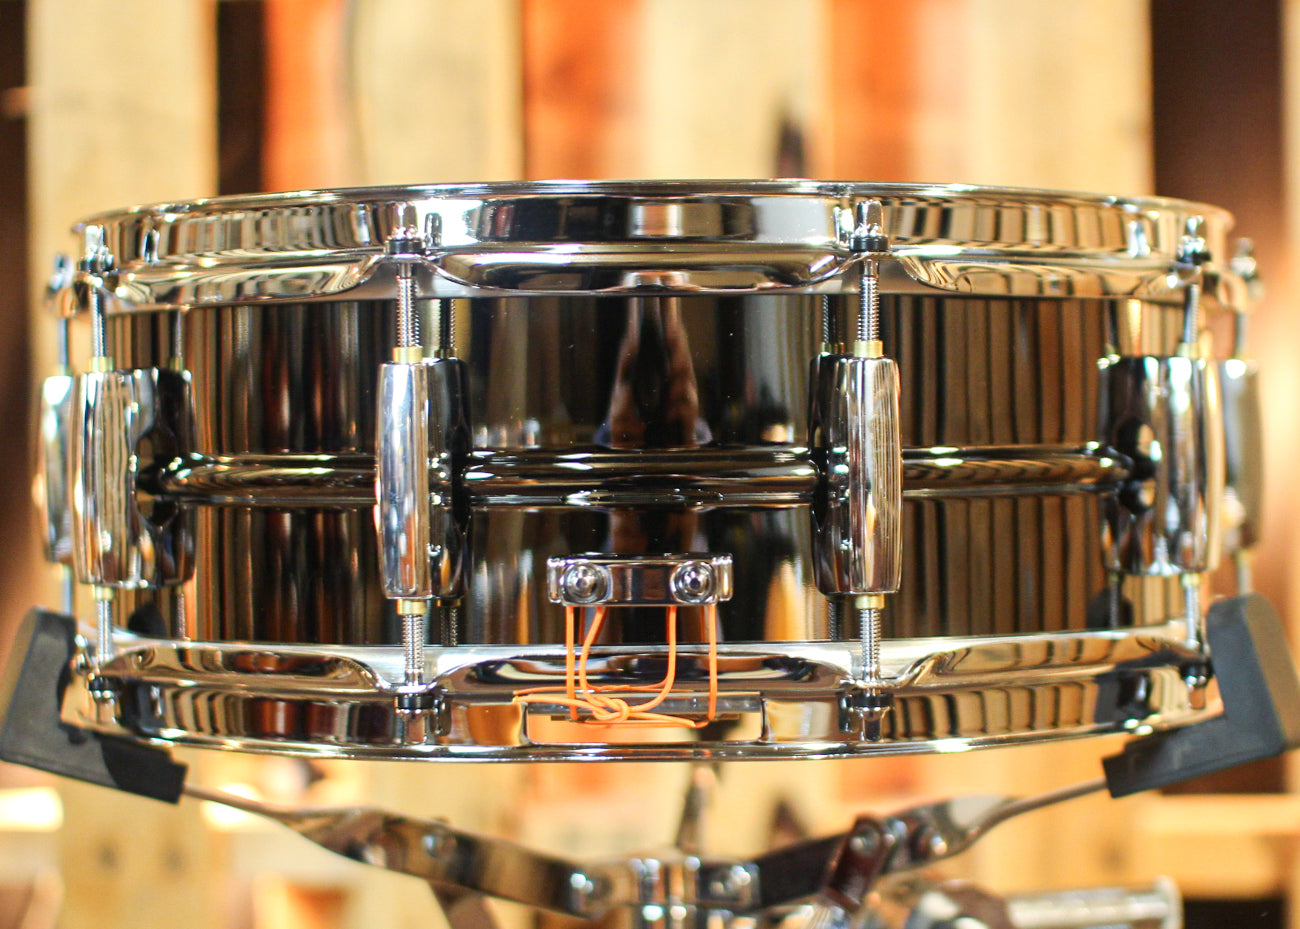 Pearl Sensitone Heritage Alloy 14 x 5 Black Brass Snare Drum – Drummers  Paradise